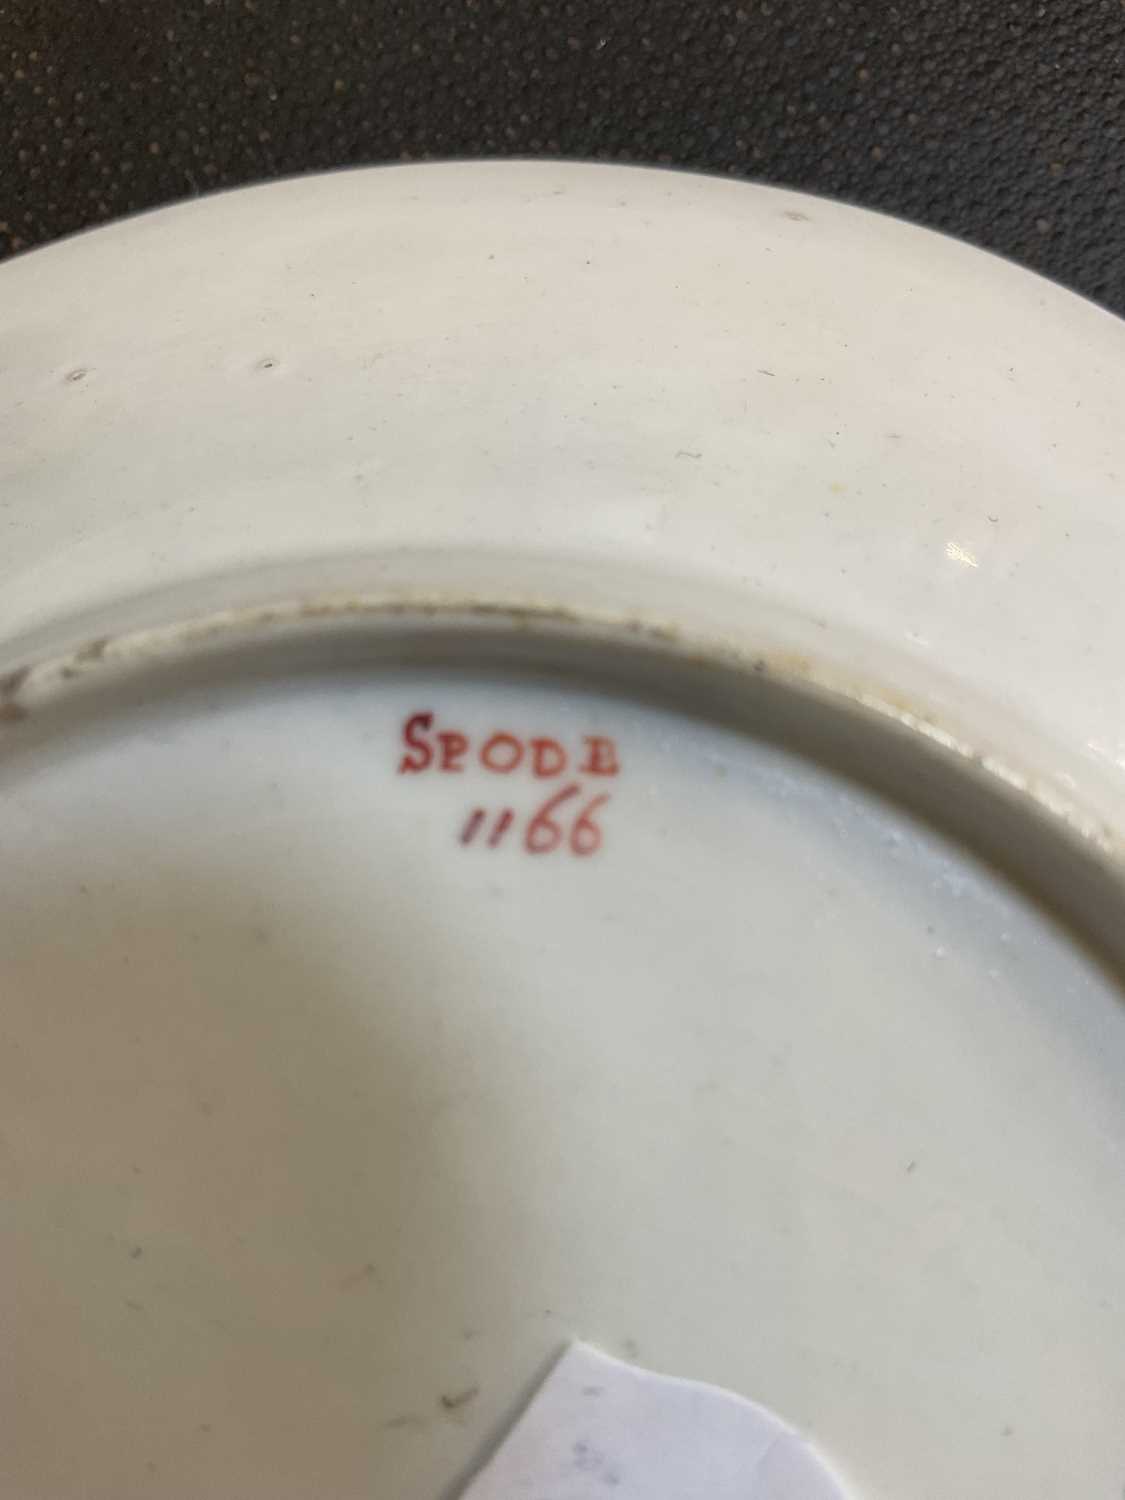 SPODE; a porcelain teacup and saucer decorated in the '1166' pattern, diameter of saucer 14cm, - Image 2 of 2